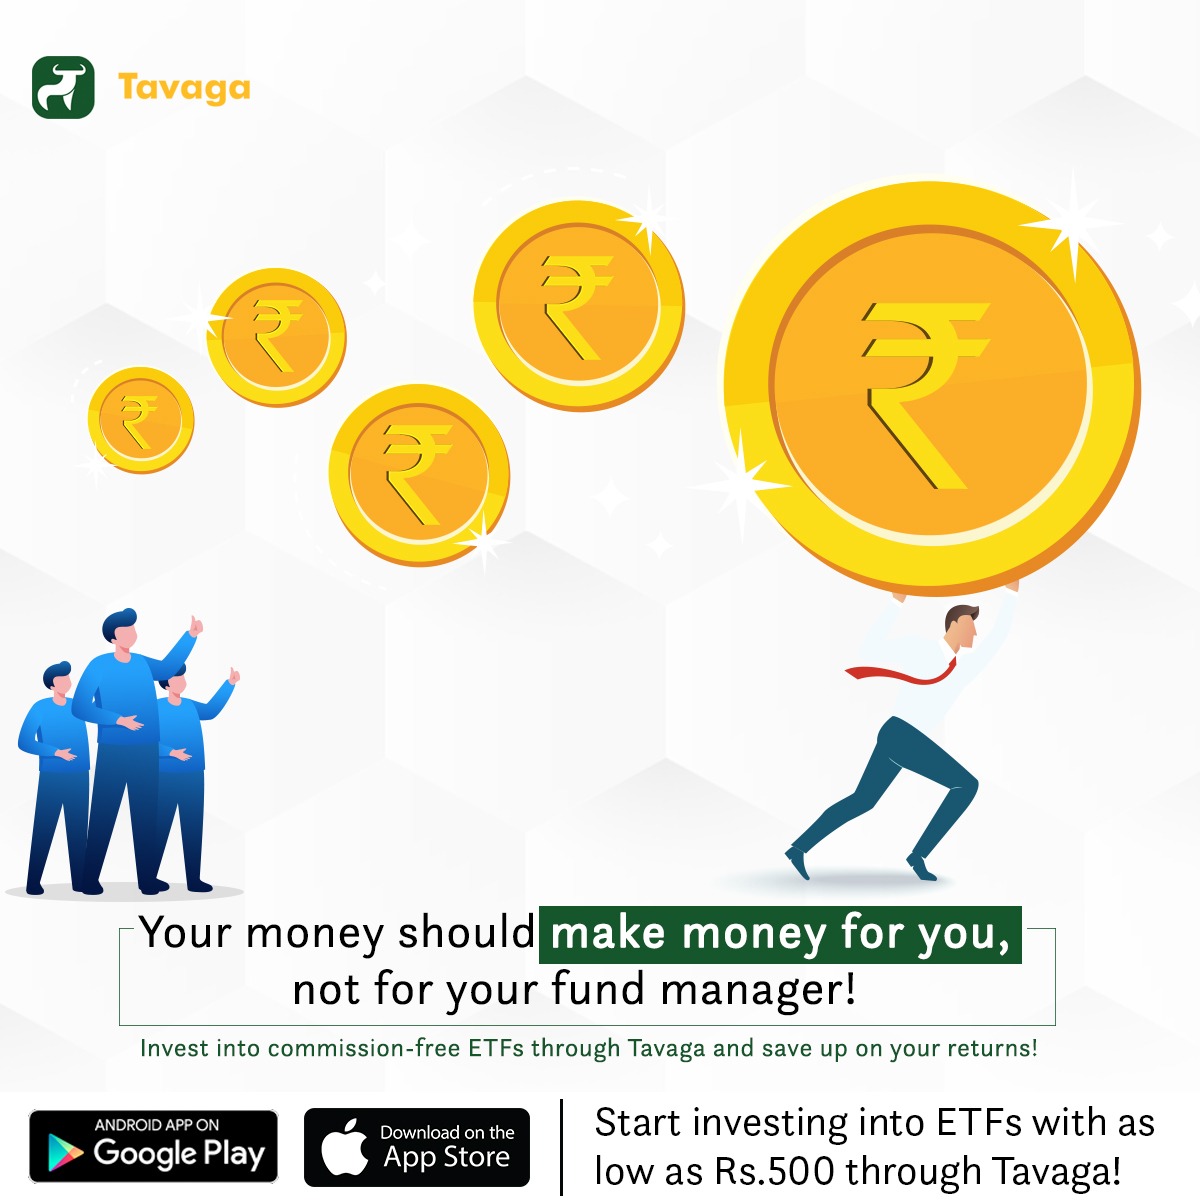 You work hard for your money, so make sure it works hard for you!

Avoid high commissions by investing in Exchange Traded Funds and start your journey of becoming truly financially independent!

#financialindependence #savings #highcommissions #exchangetradedfunds #etfs